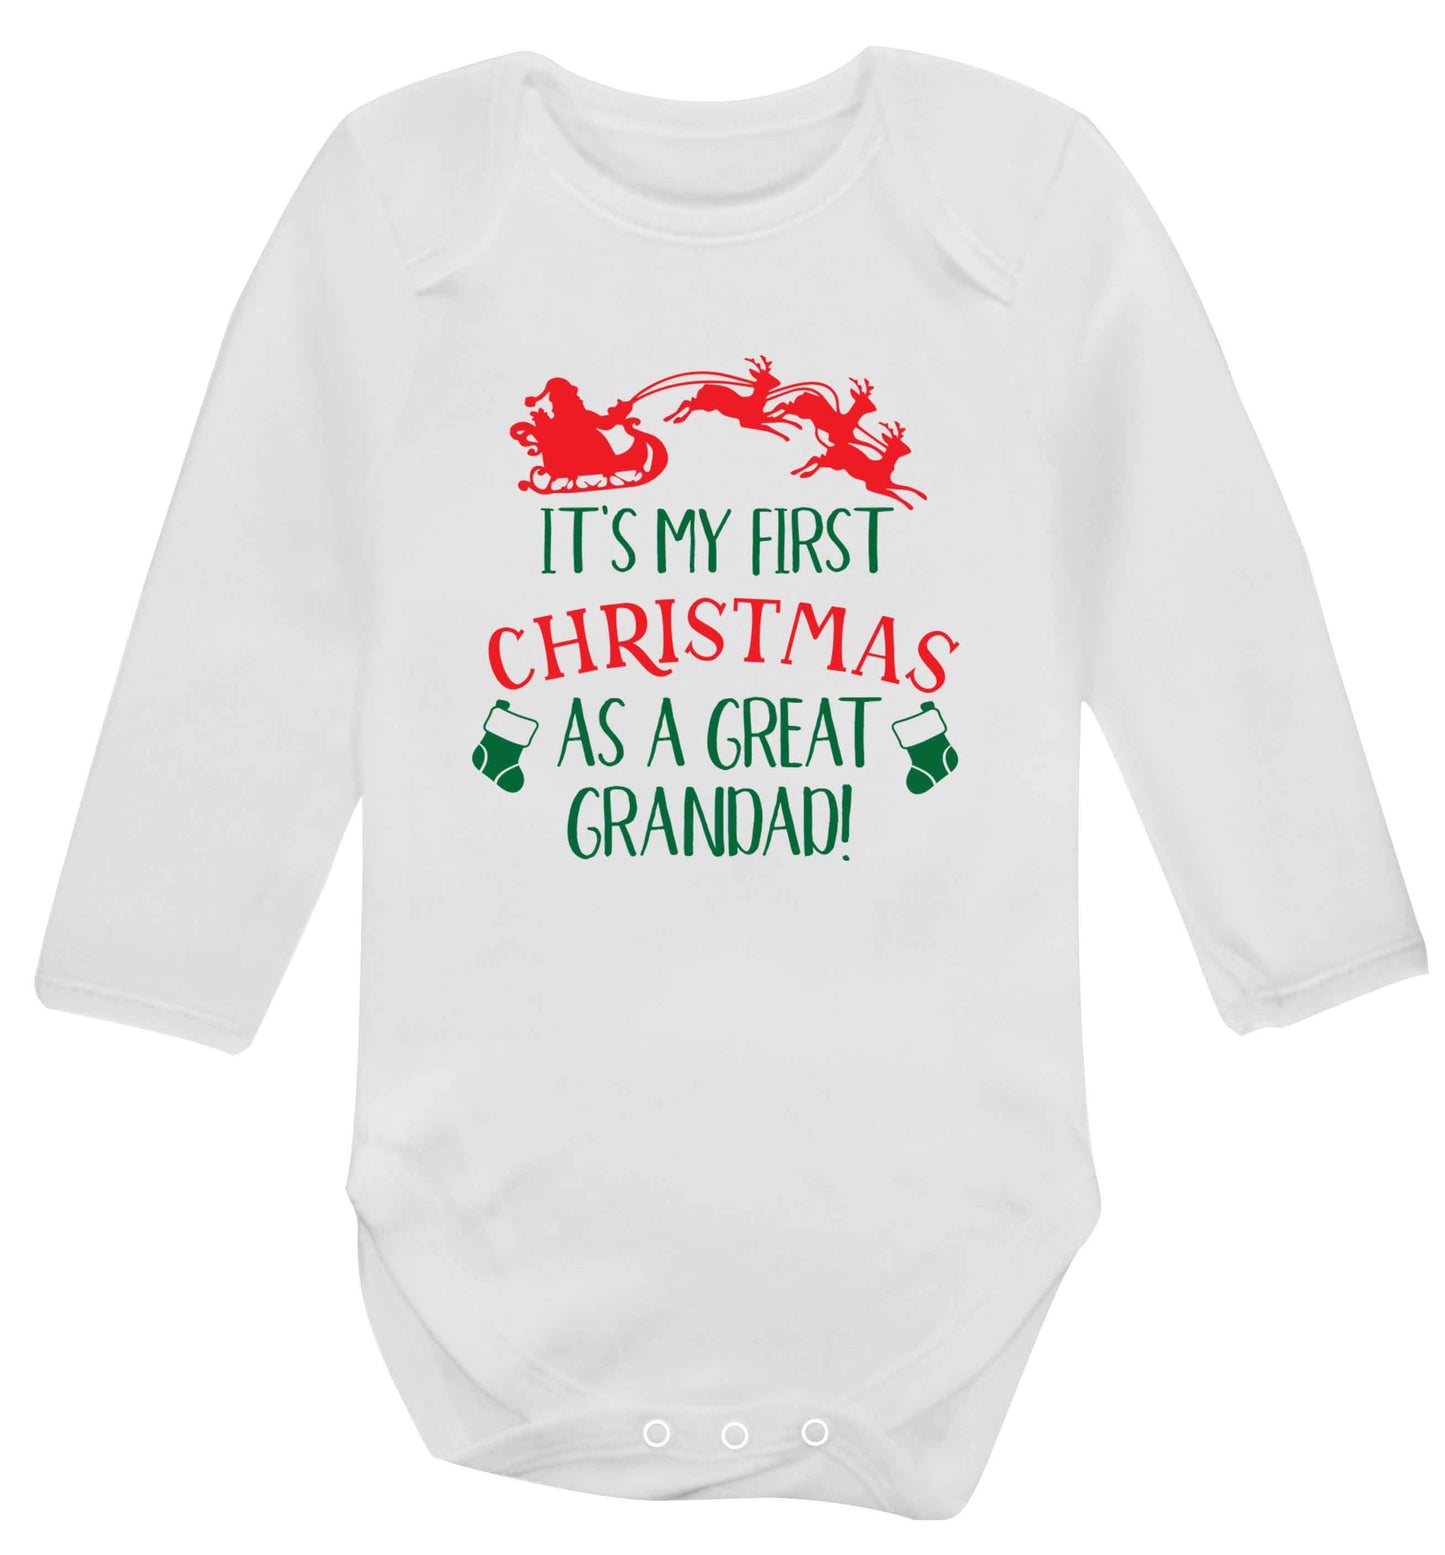 It's my first Christmas as a great grandad! Baby Vest long sleeved white 6-12 months